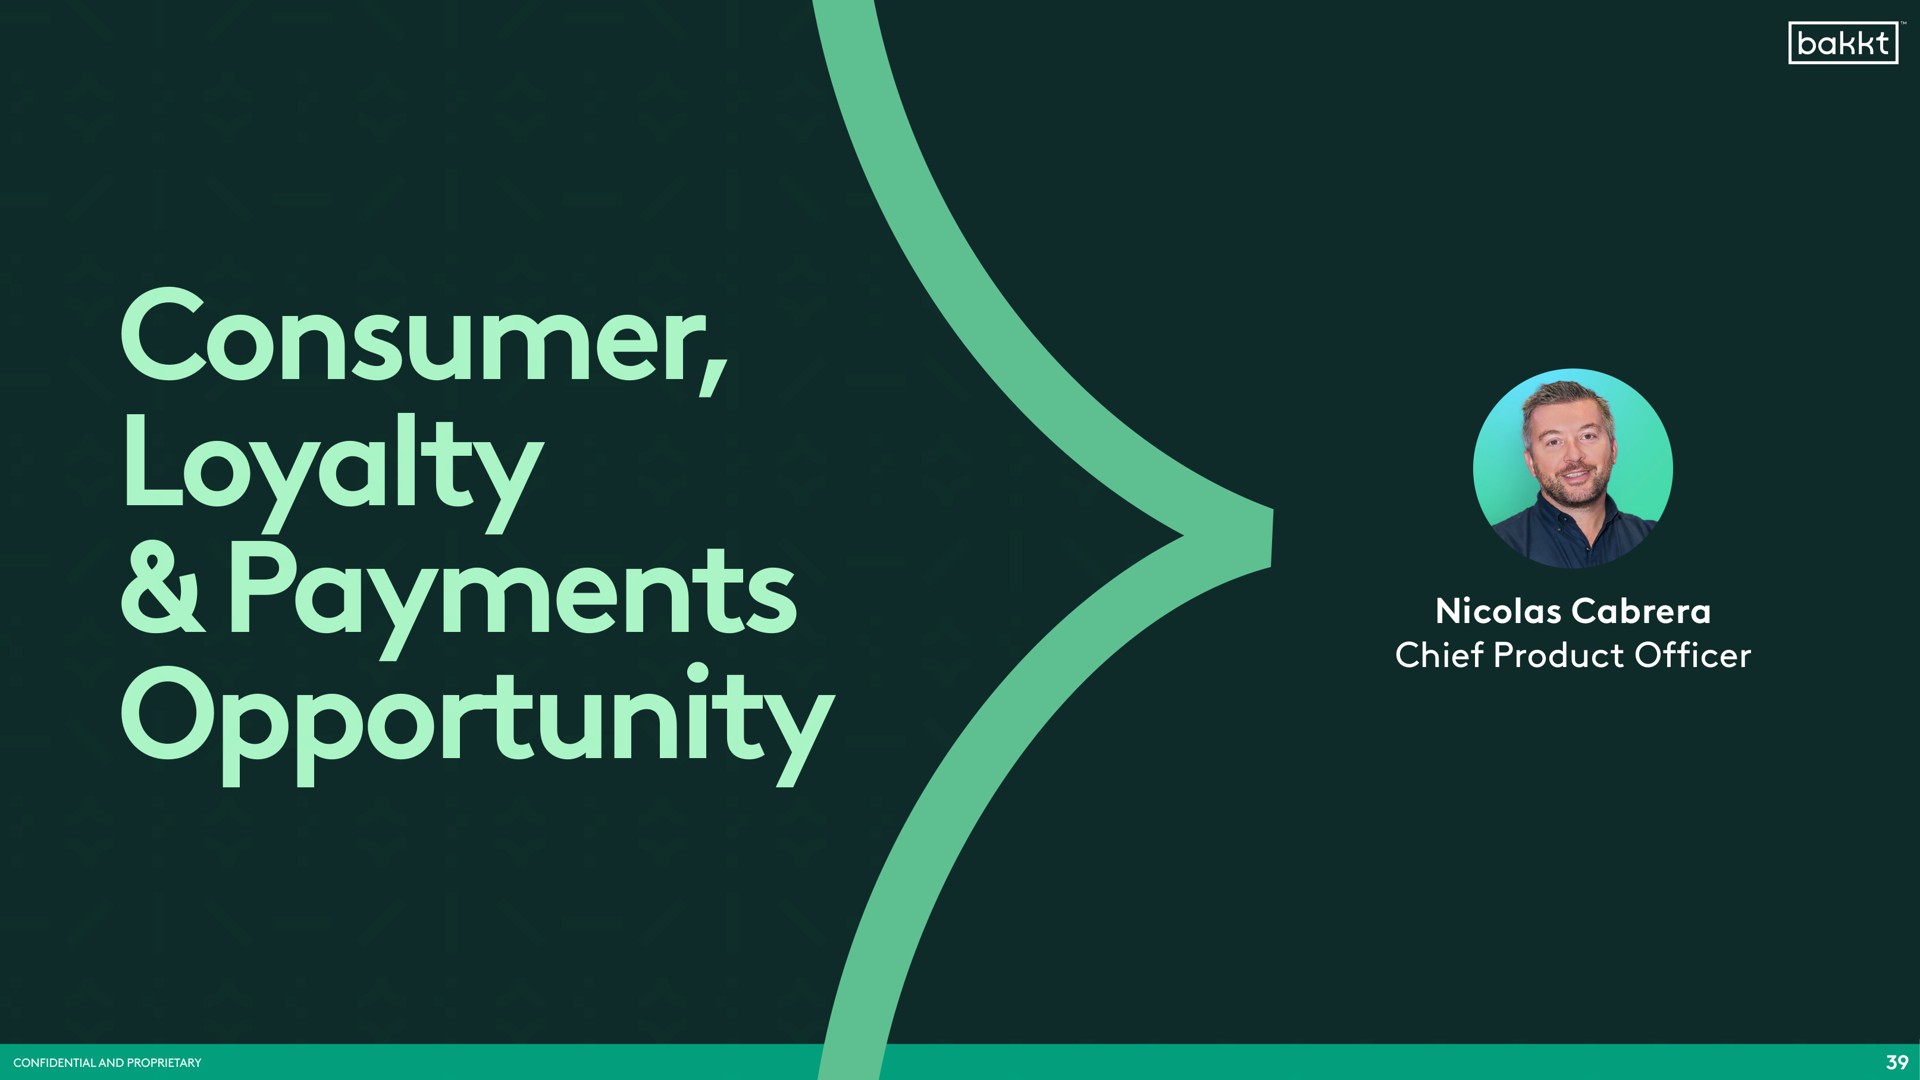 consumer loyalty payments opportunity chief product officer | Bakkt